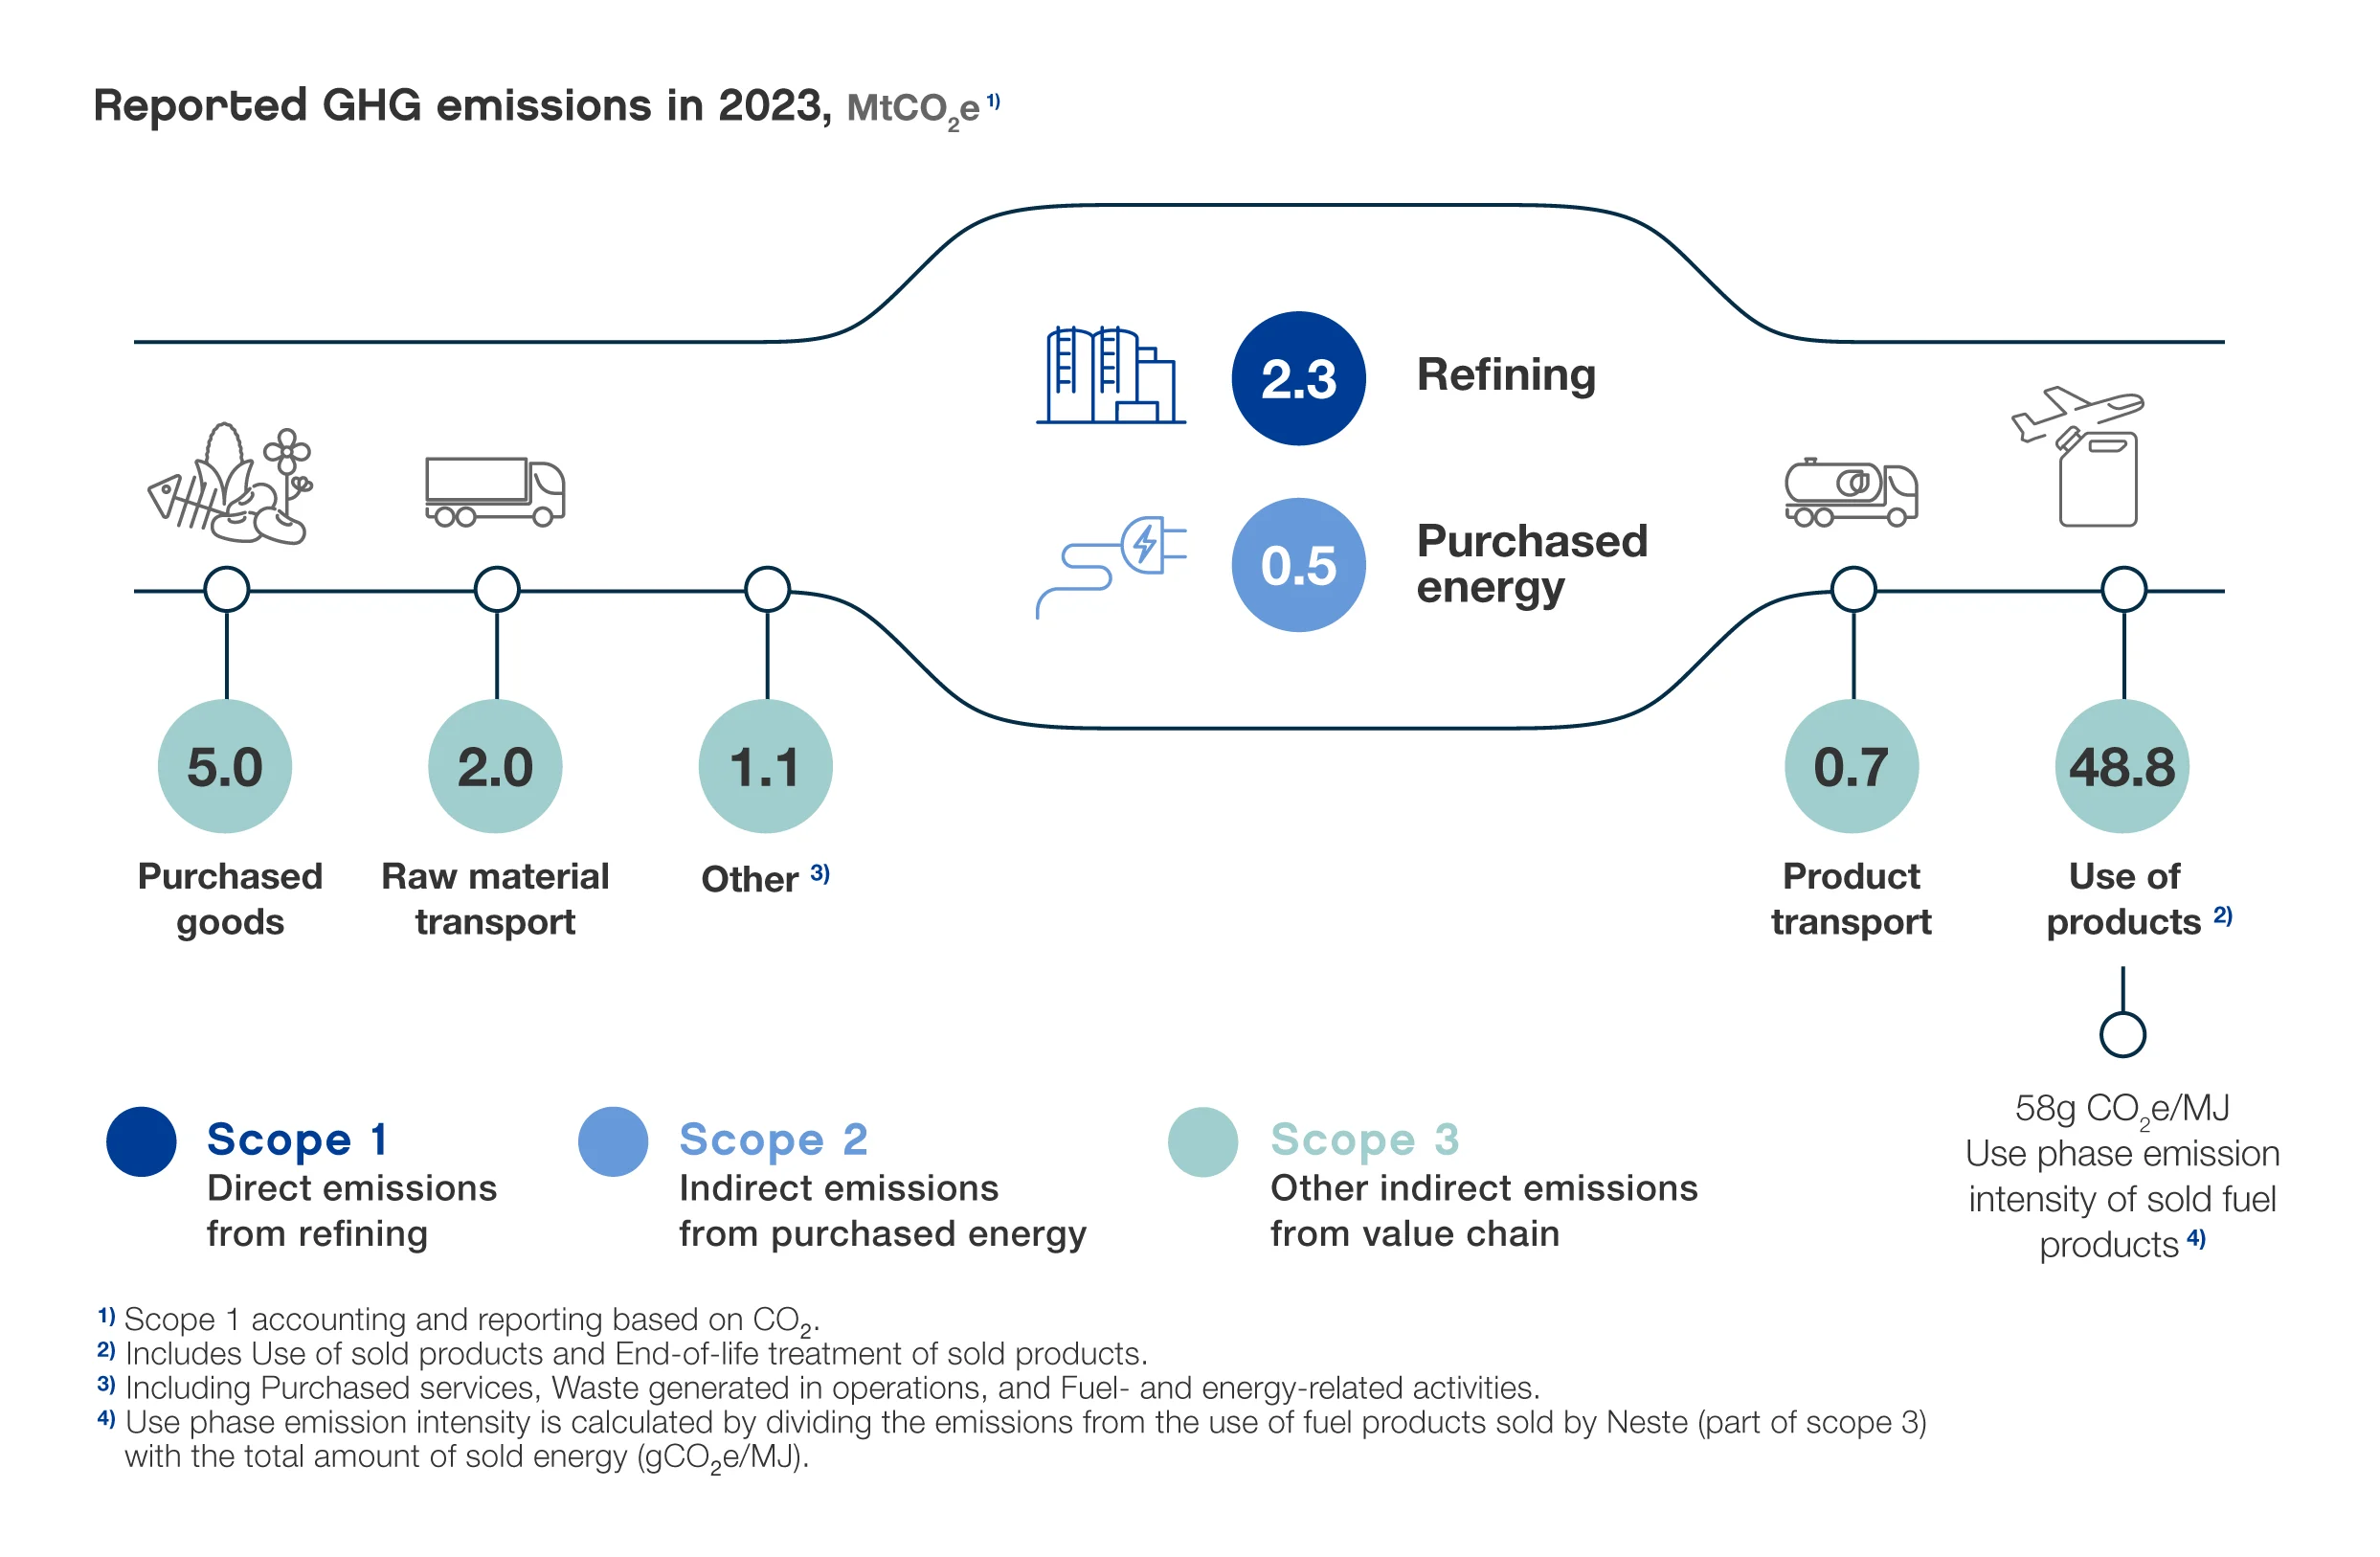 Neste´s greenhouse gas emissions in 2023